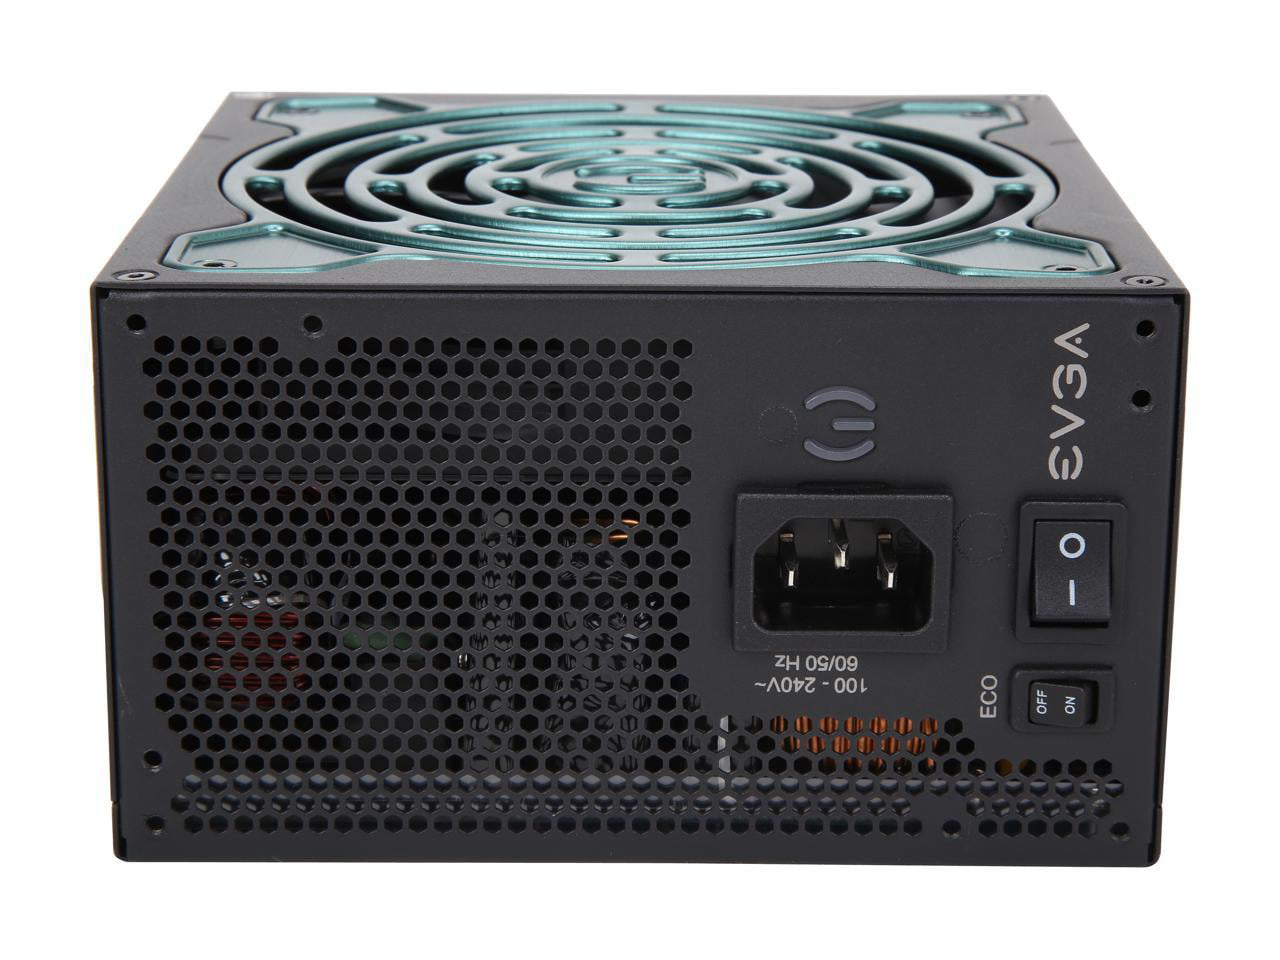 EVGA - Products - EVGA SuperNOVA 850 G5, 80 Plus Gold 850W, Fully Modular,  Eco Mode with FDB Fan, 10 Year Warranty, Includes Power ON Self Tester,  Compact 150mm Size, Power Supply 220-G5-0850-X1 - 220-G5-0850-X1